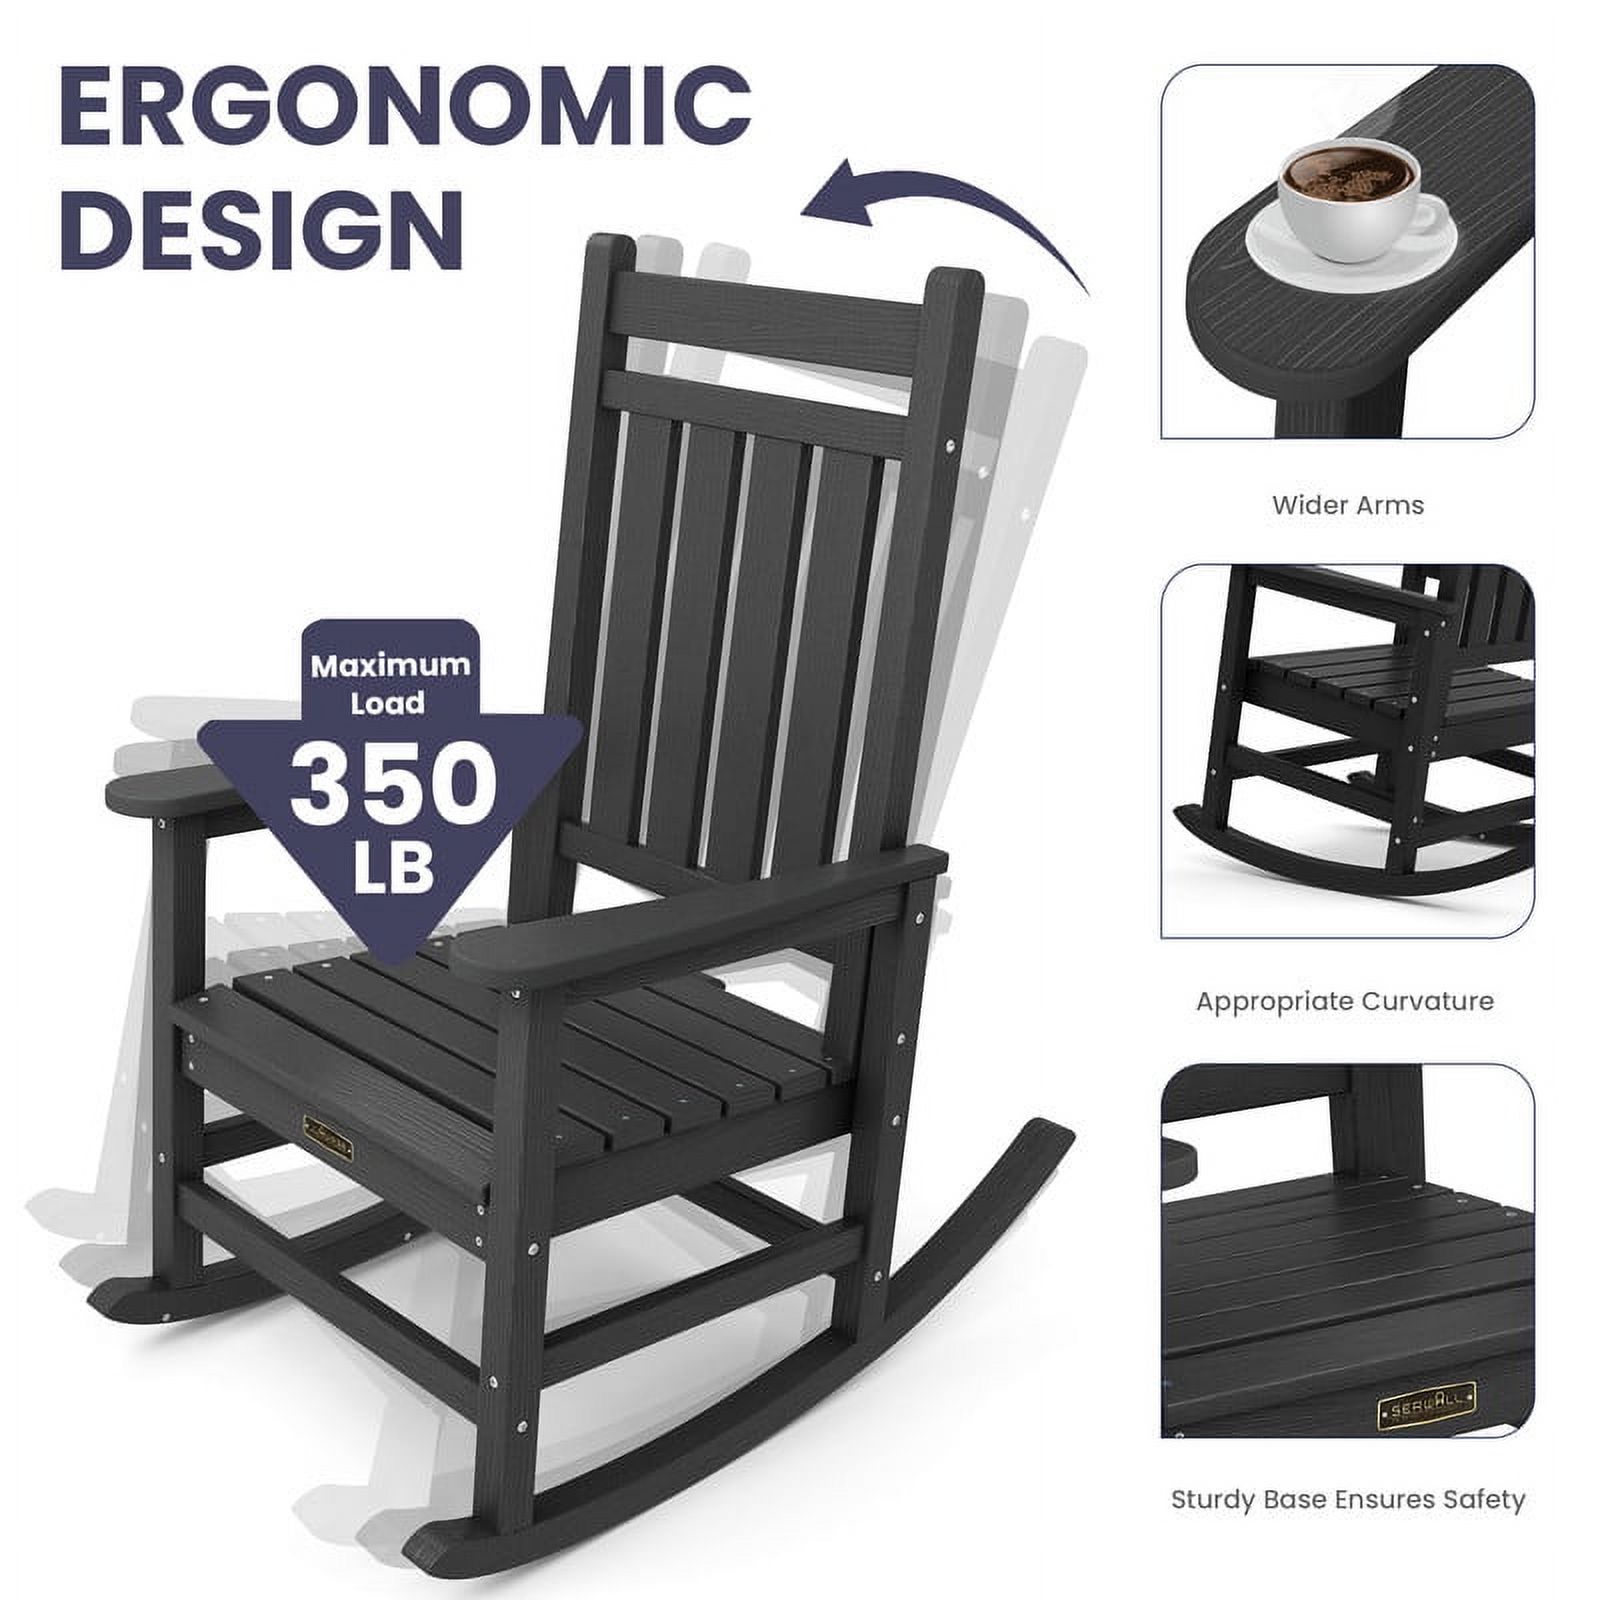 ROWHY  Outdoor Slat Rocking Chair, HDPE Plastic Porch Rocker, Black - image 4 of 5